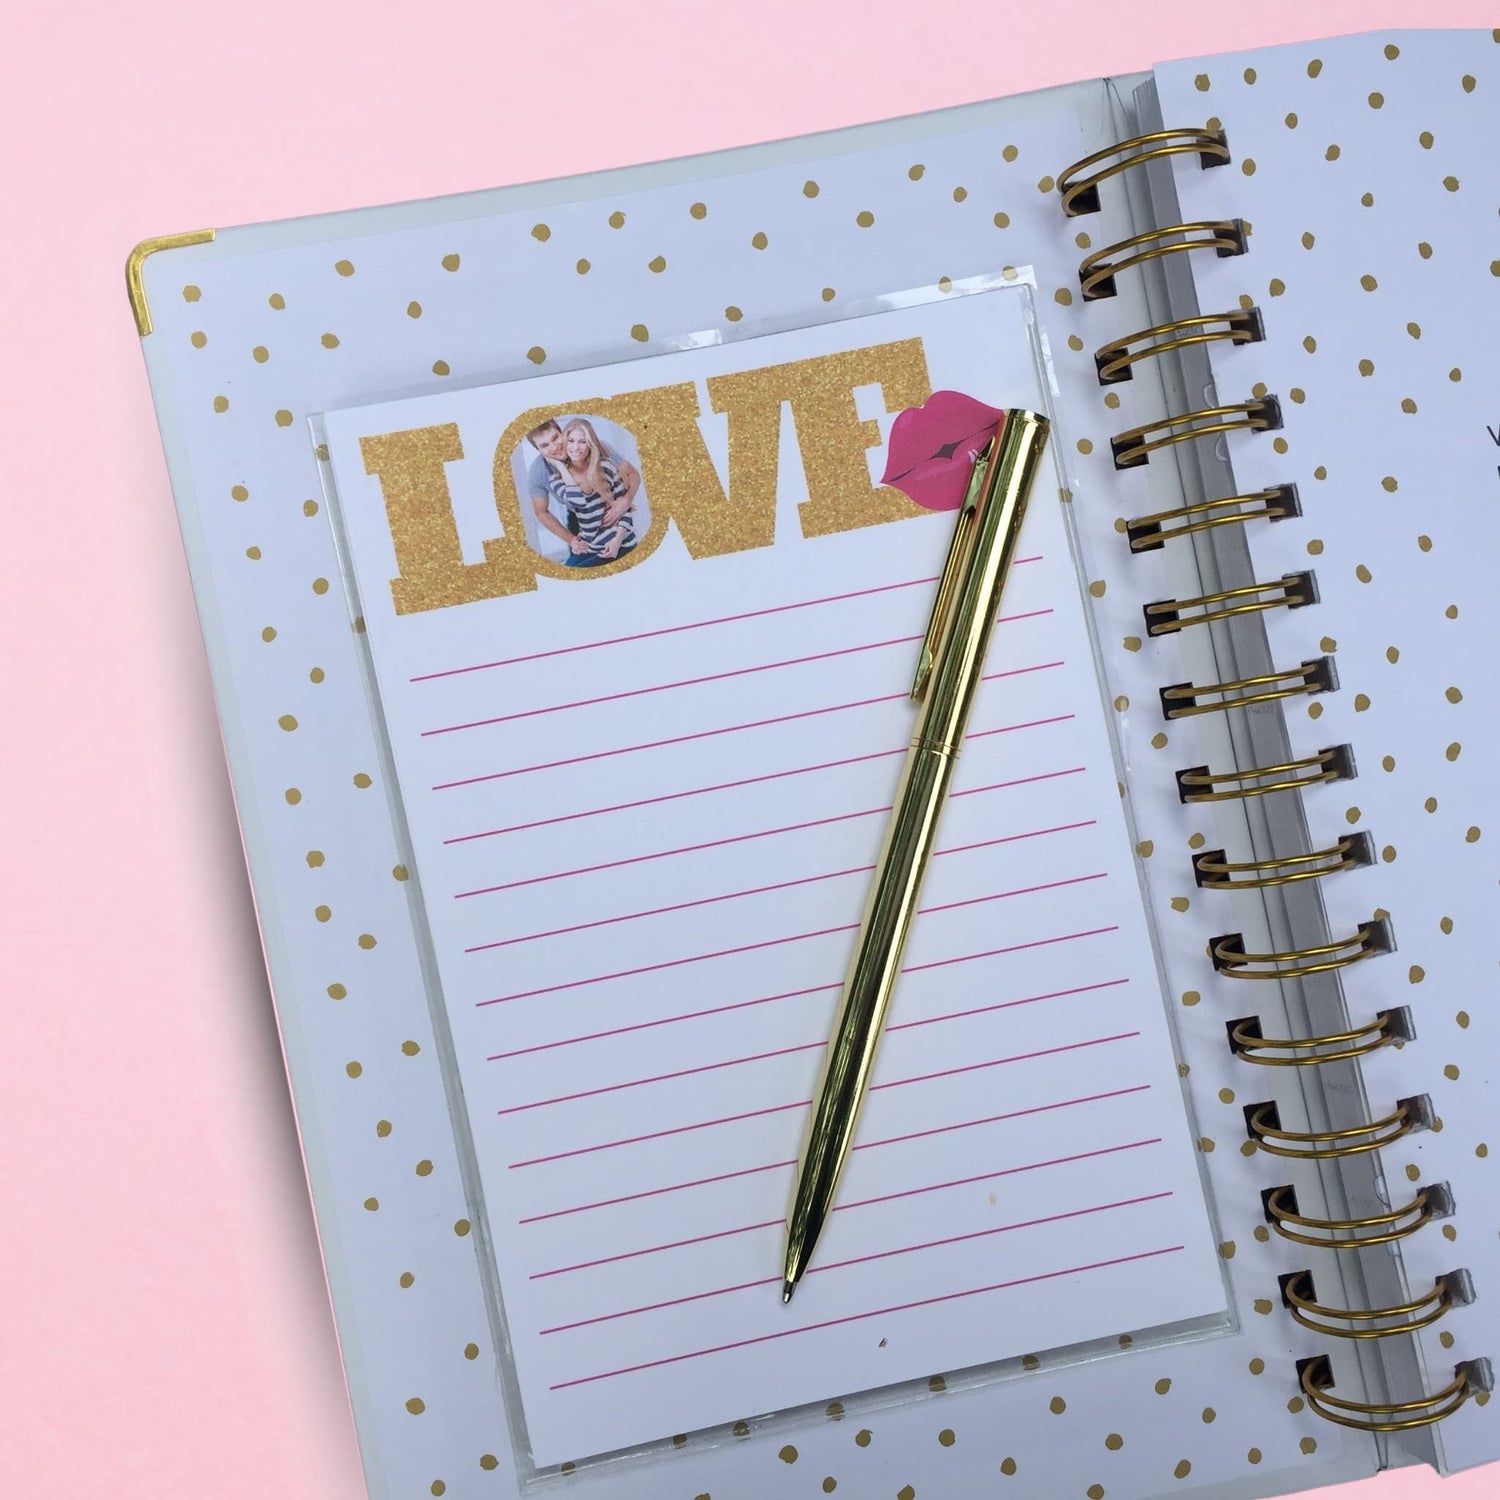 personalized notepad using the word love as a frame for young couples photo in the "o"